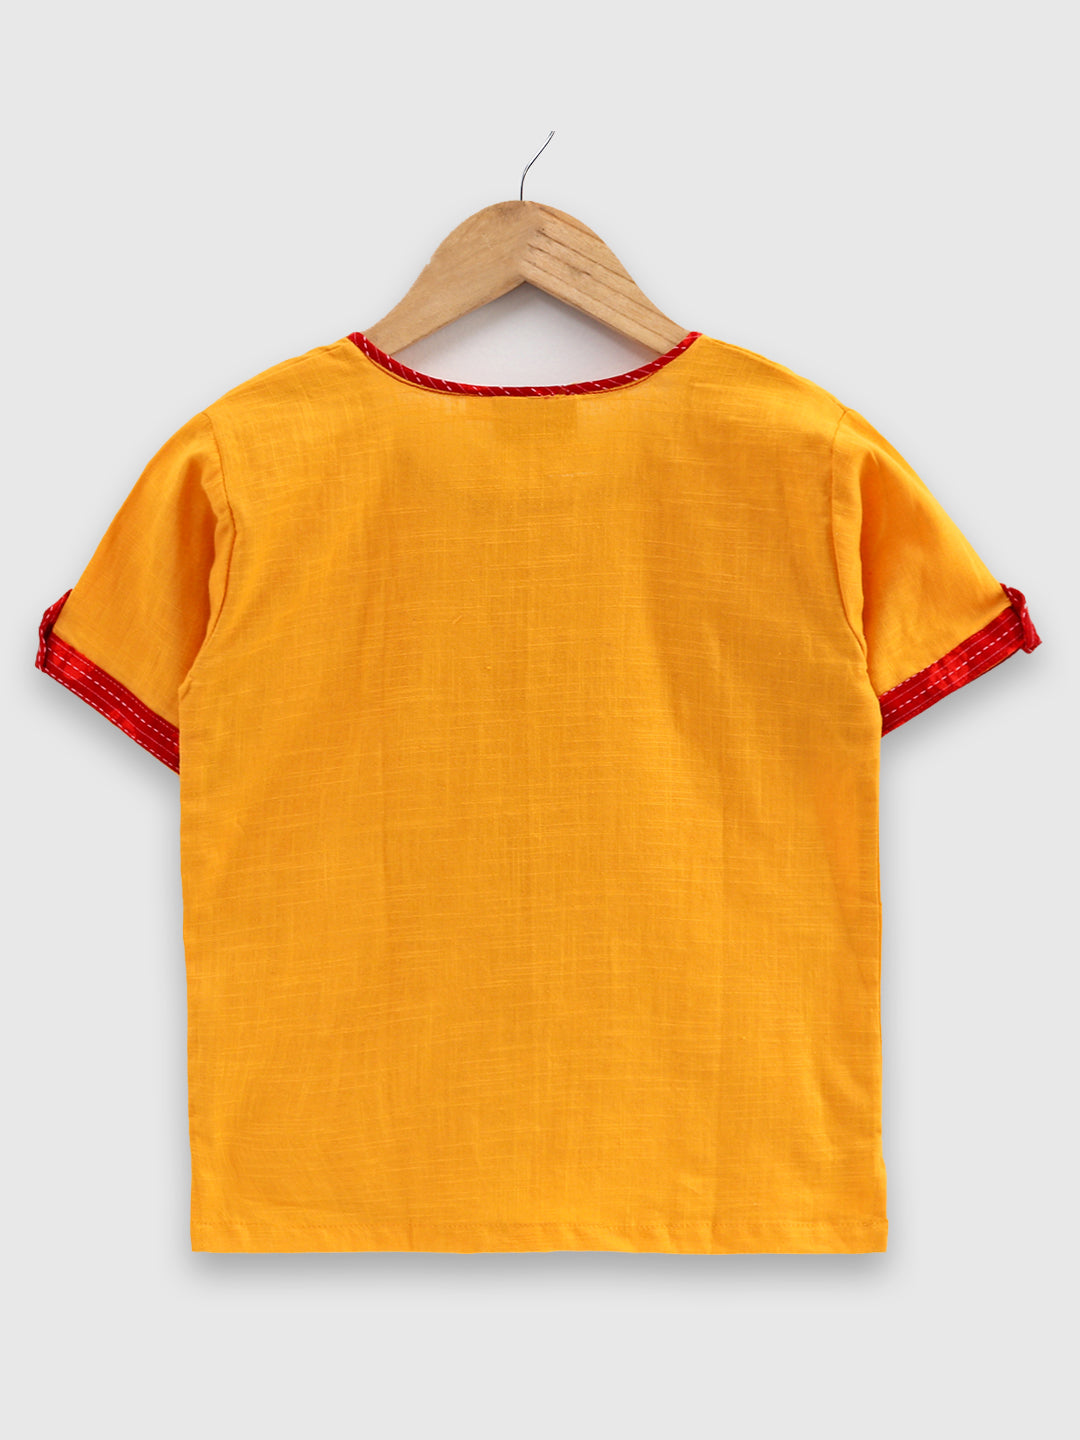 BownBee Cotton Half Sleeve Shirt For Baby Boys- Yellow